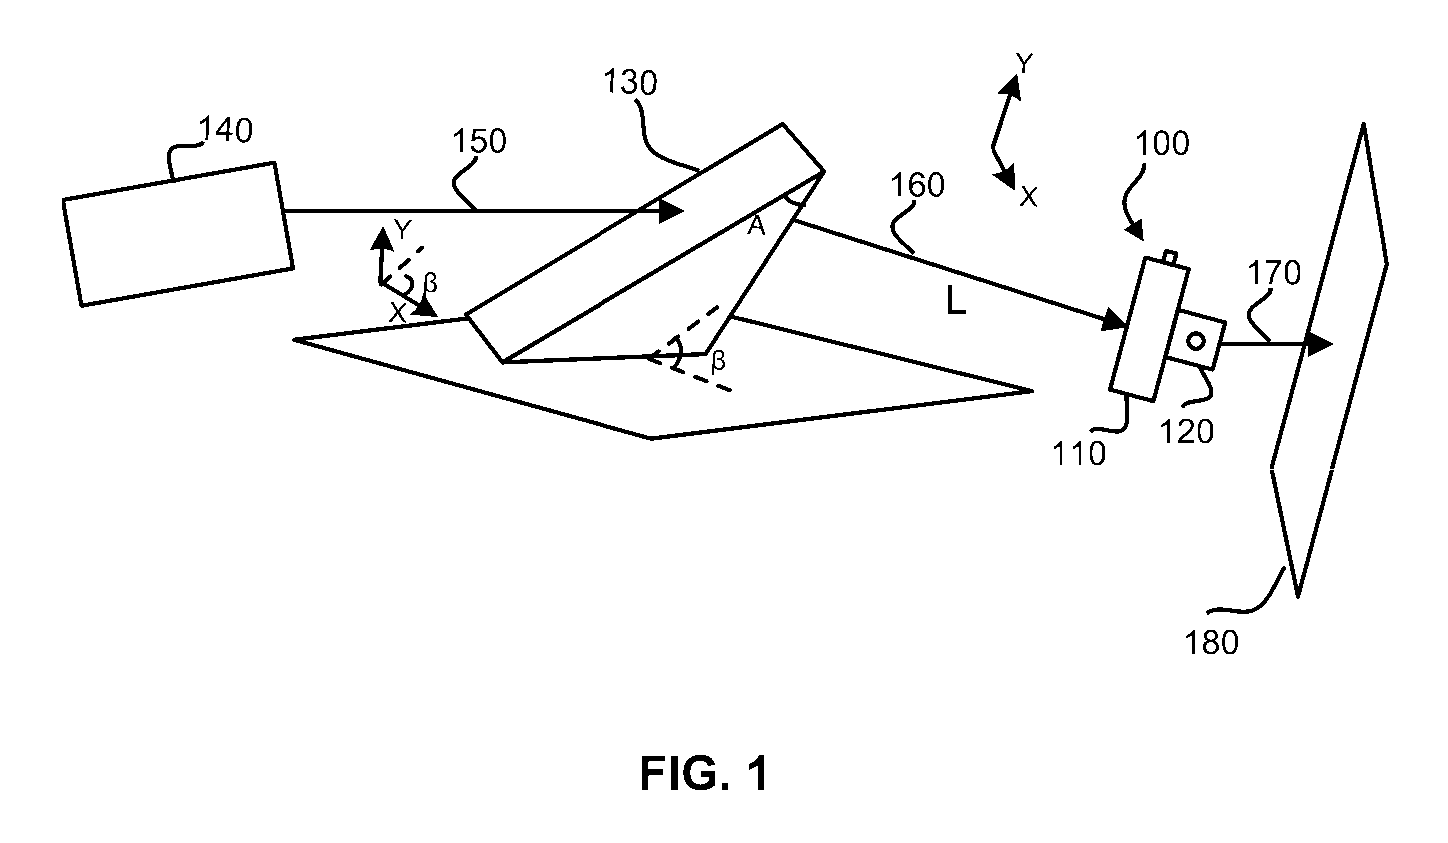 Light pulse positioning with dispersion compensation